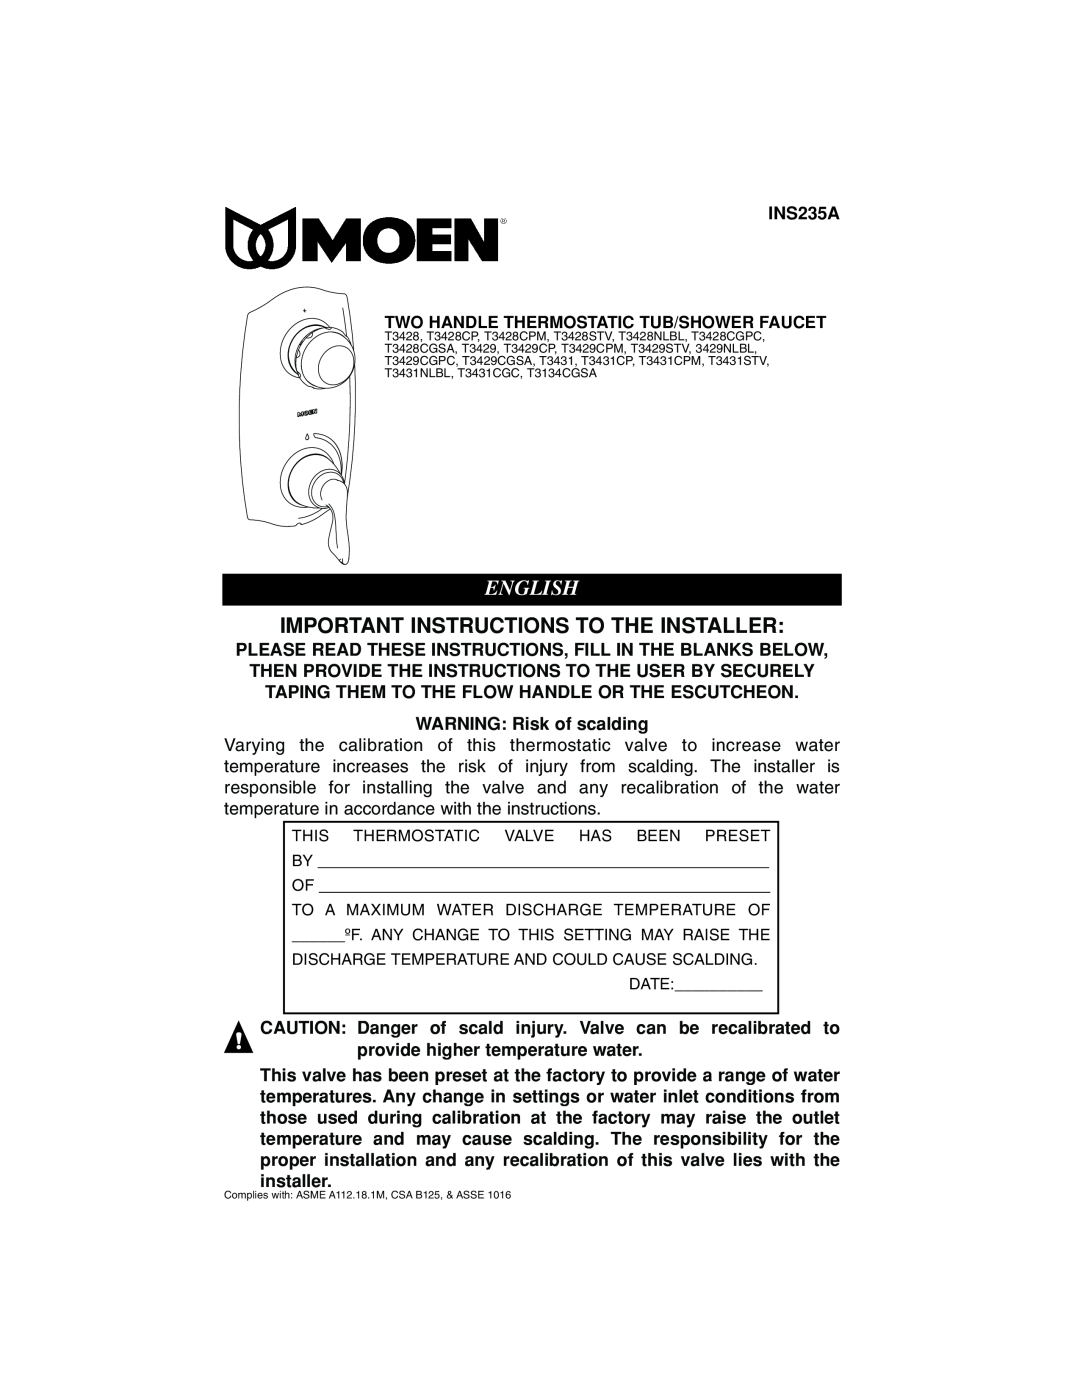 Moen INS235A manual English, Important Instructions To The Installer 